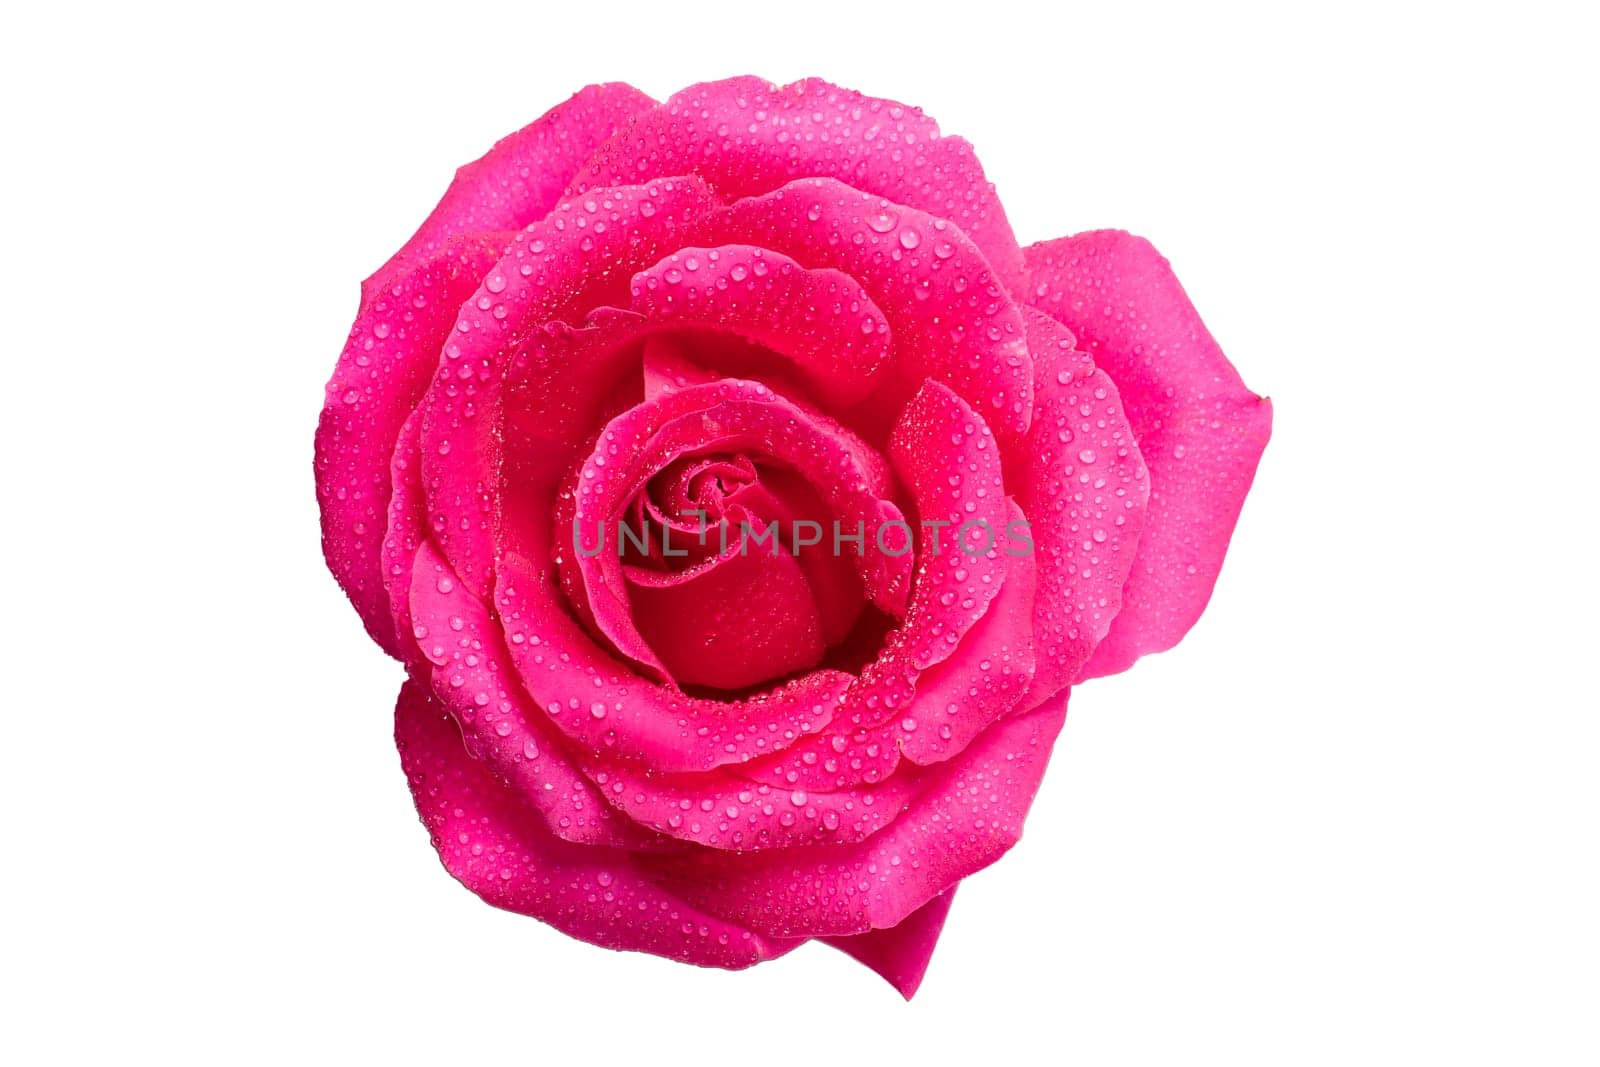 Pink rose with dew drops close-up on a white background. by Sviatlana